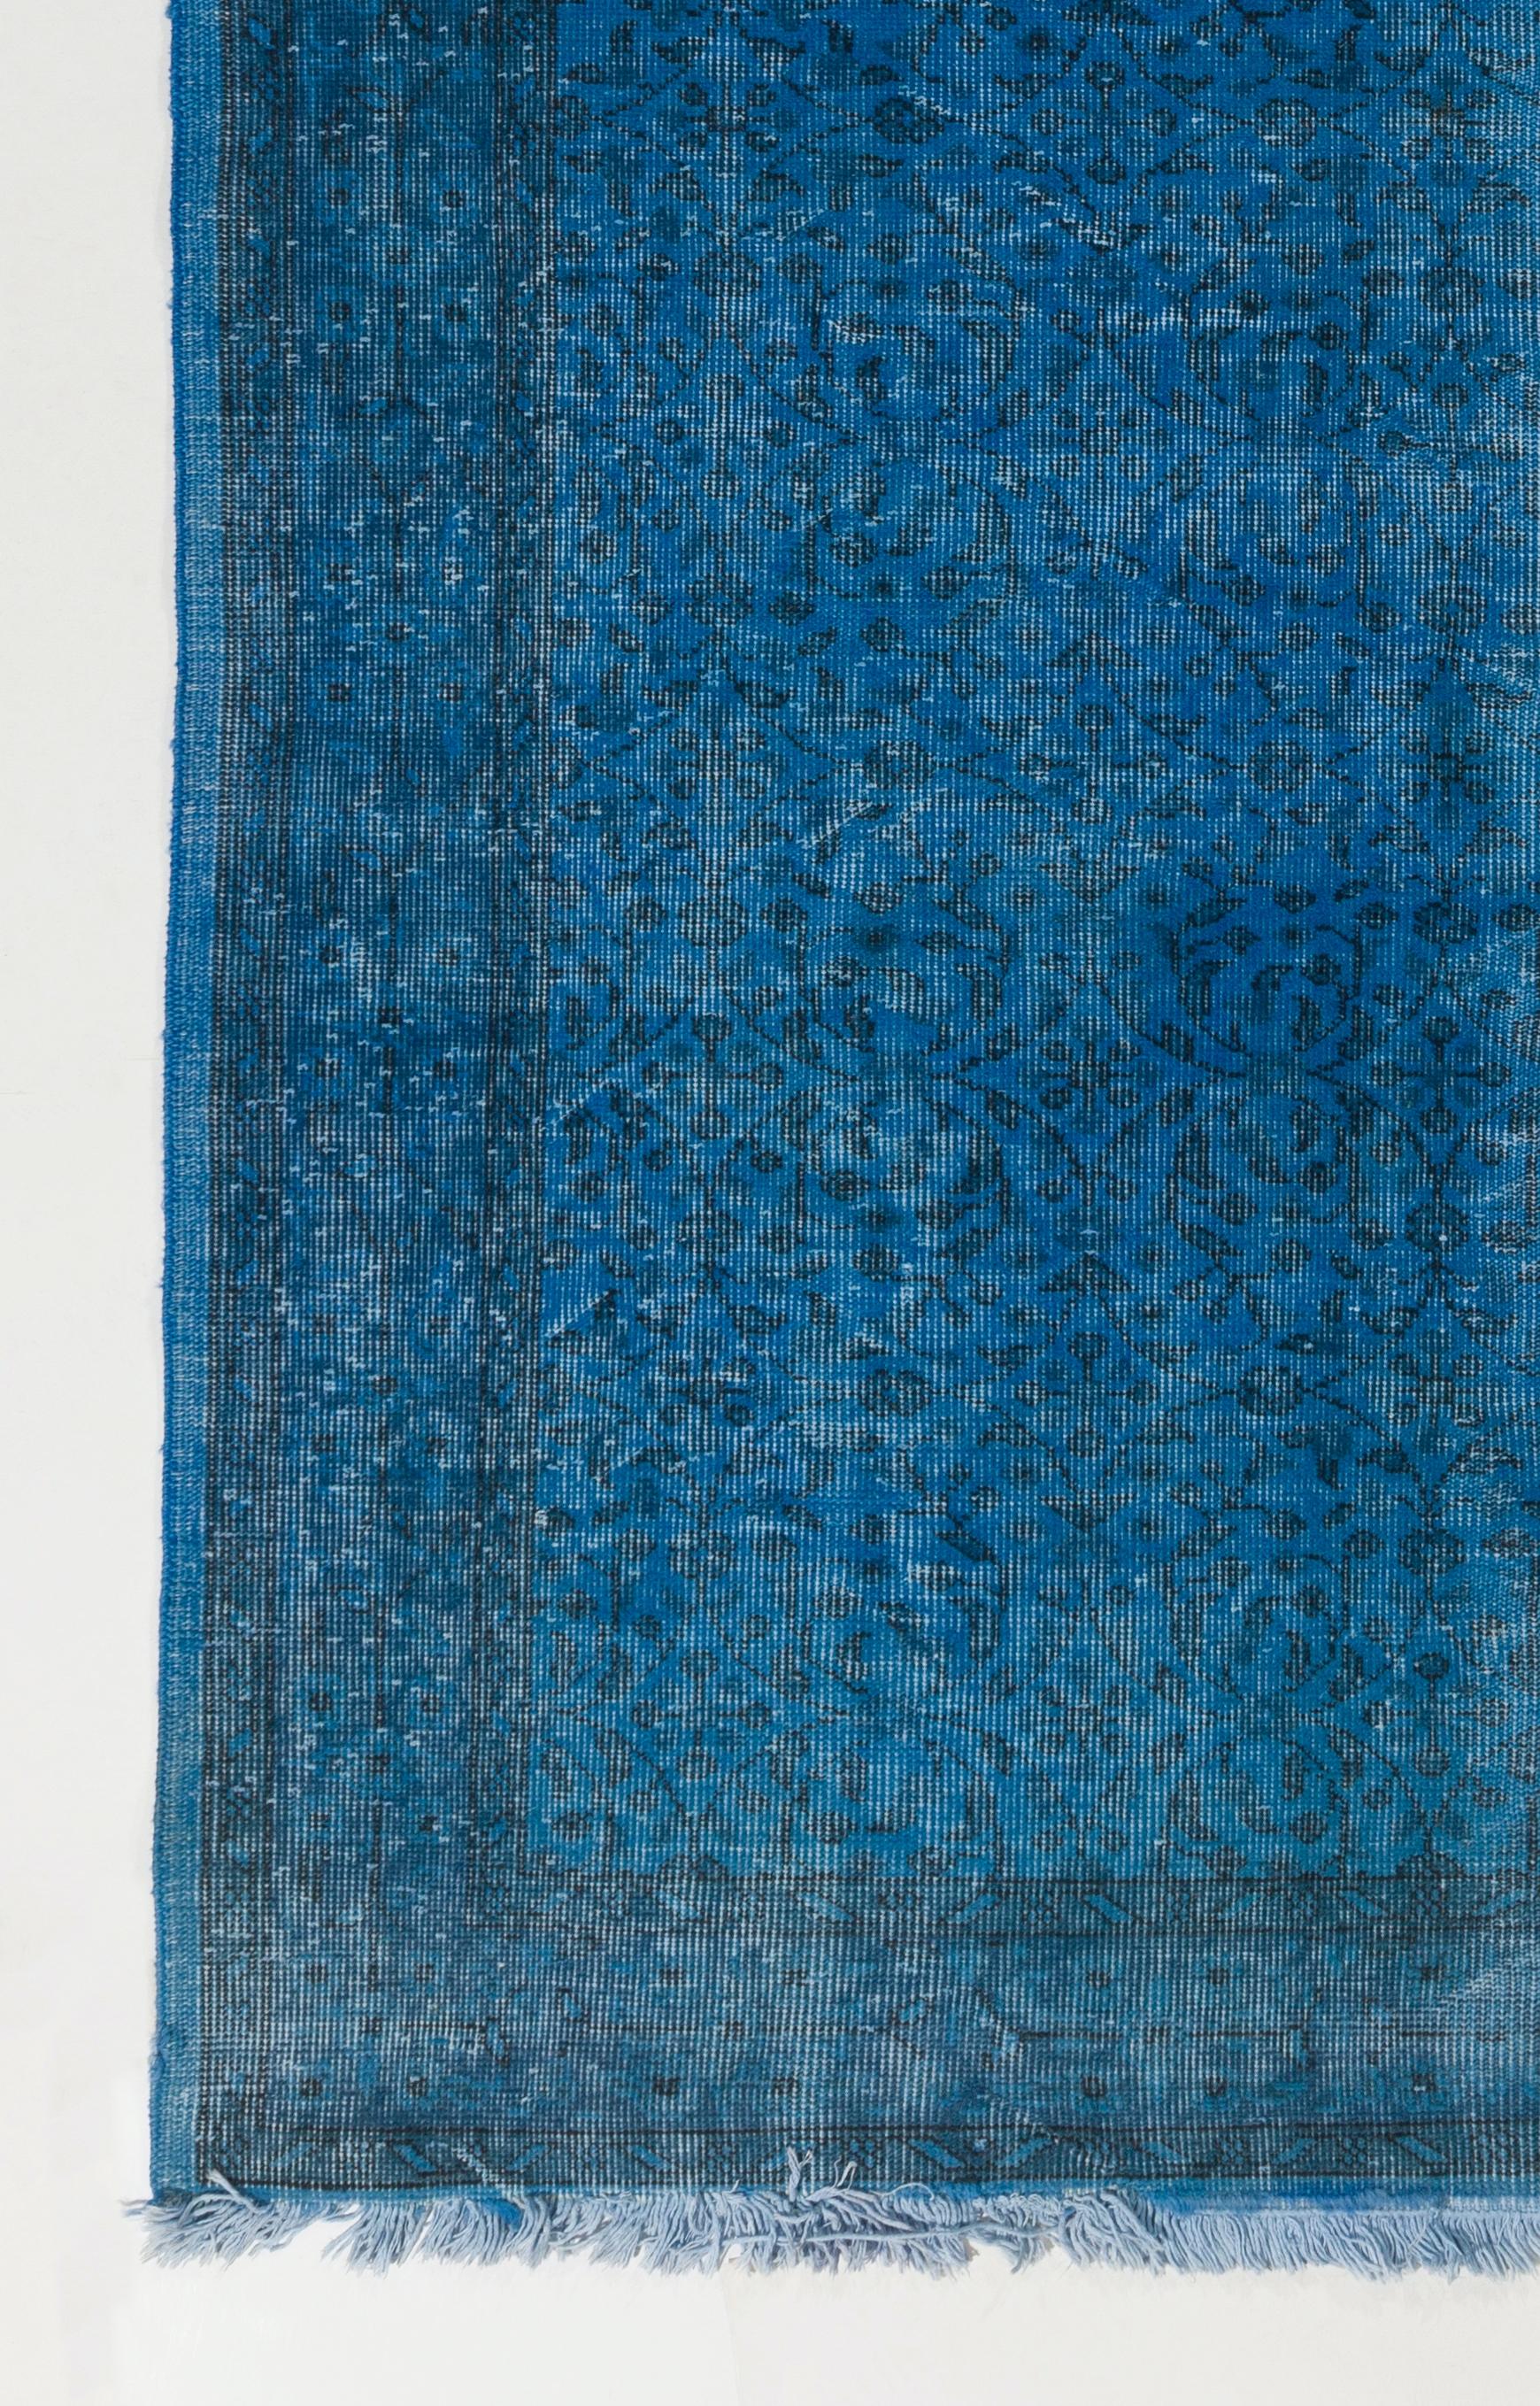 Modern 6x9 Ft Vintage Turkish Rug ReDyed in Blue Color. Great 4 Contemporary Interiors